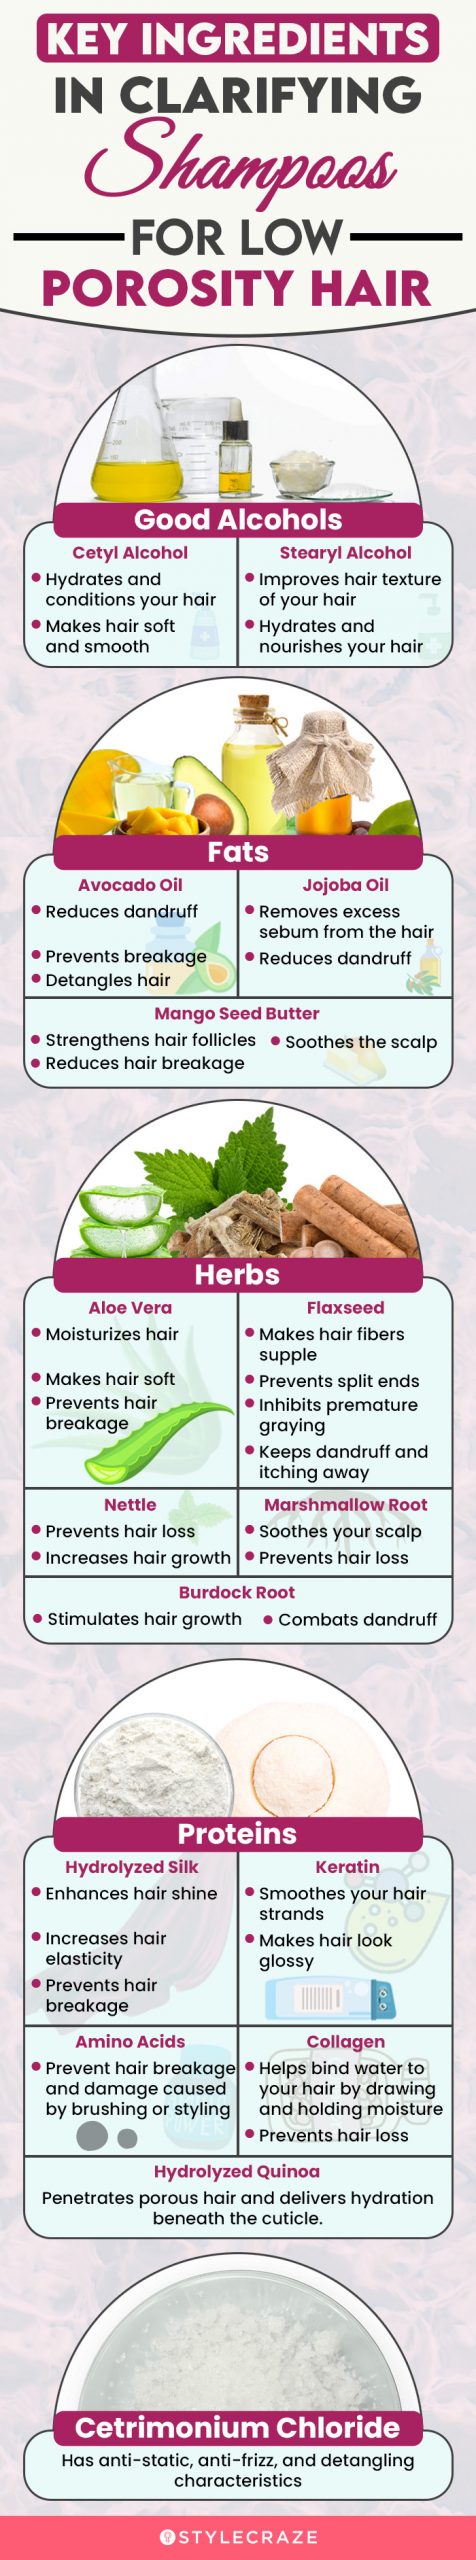 Key Ingredients In Clarifying Shampoos For Low Porosity Hair (infographic)